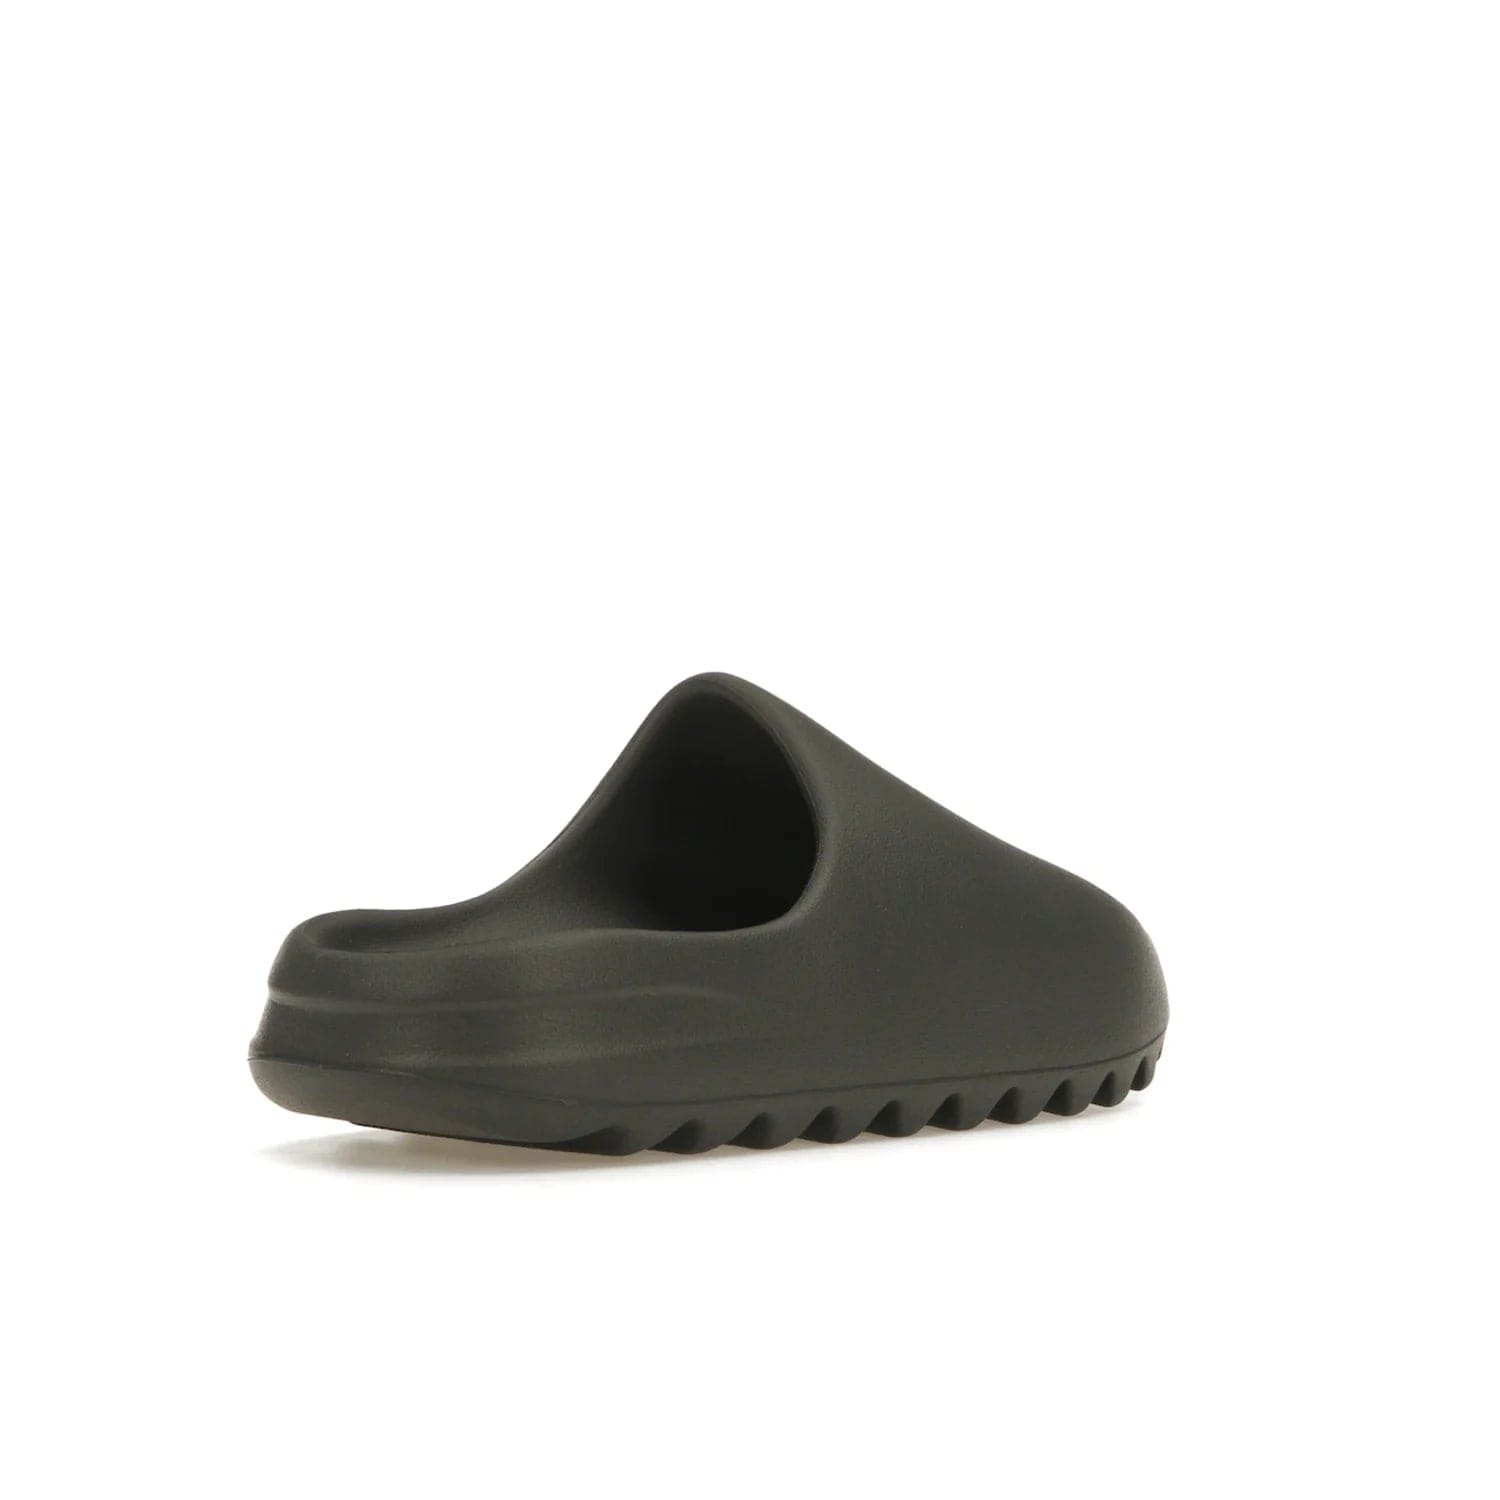 adidas Yeezy Slide Granite - Image 32 - Only at www.BallersClubKickz.com - Introducing the adidas Yeezy Slide Granite with a sleek, soft-to-touch one-piece upper – perfect for making a statement with its minimalistic design and luxurious comfort. Get yours now for only $70.